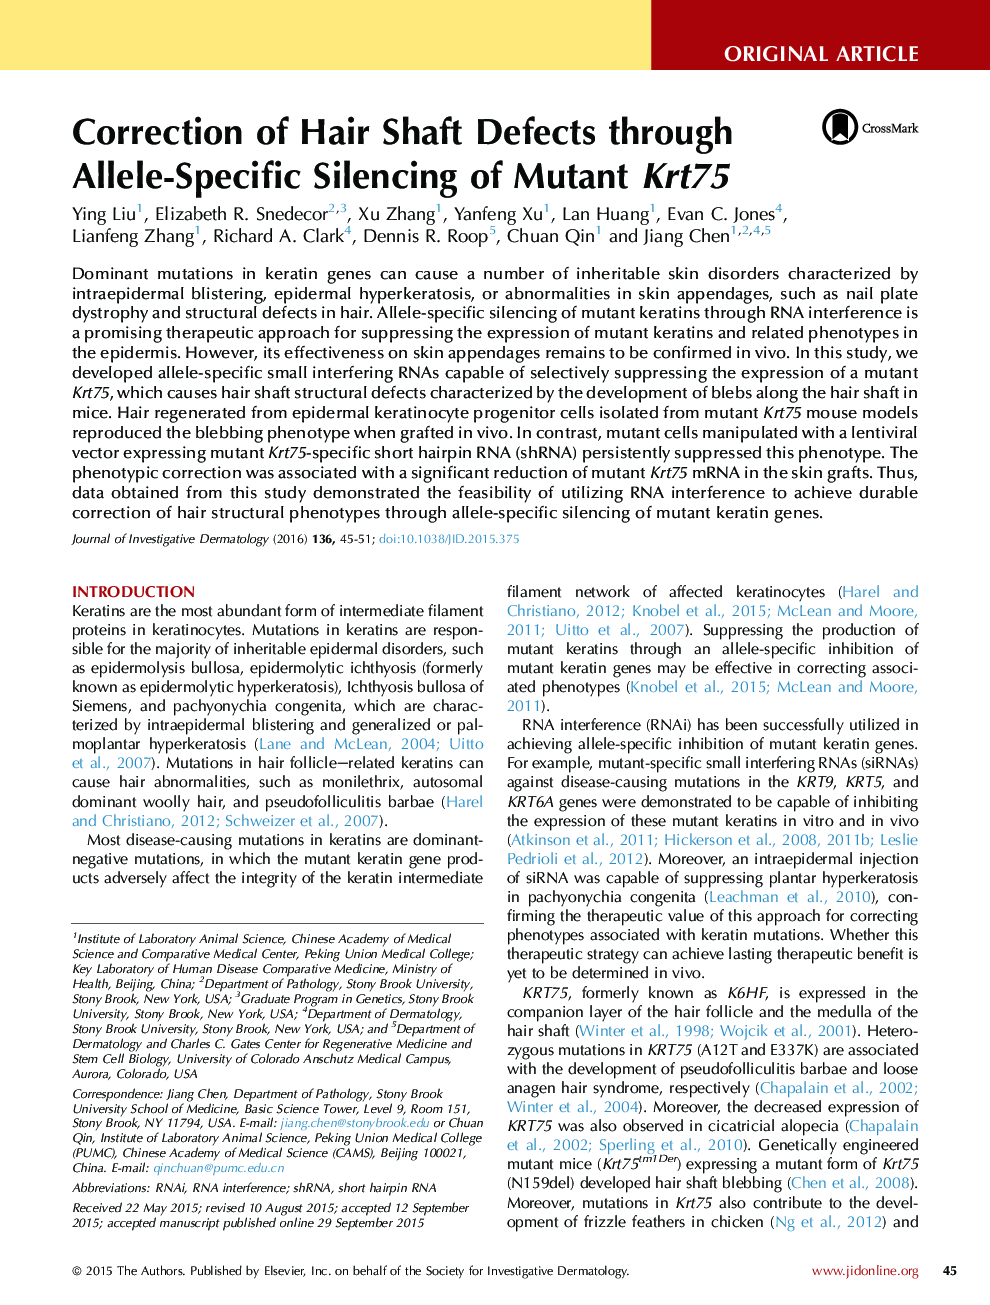 Original ArticleAppendagesCorrection of Hair Shaft Defects through Allele-Specific Silencing of Mutant Krt75